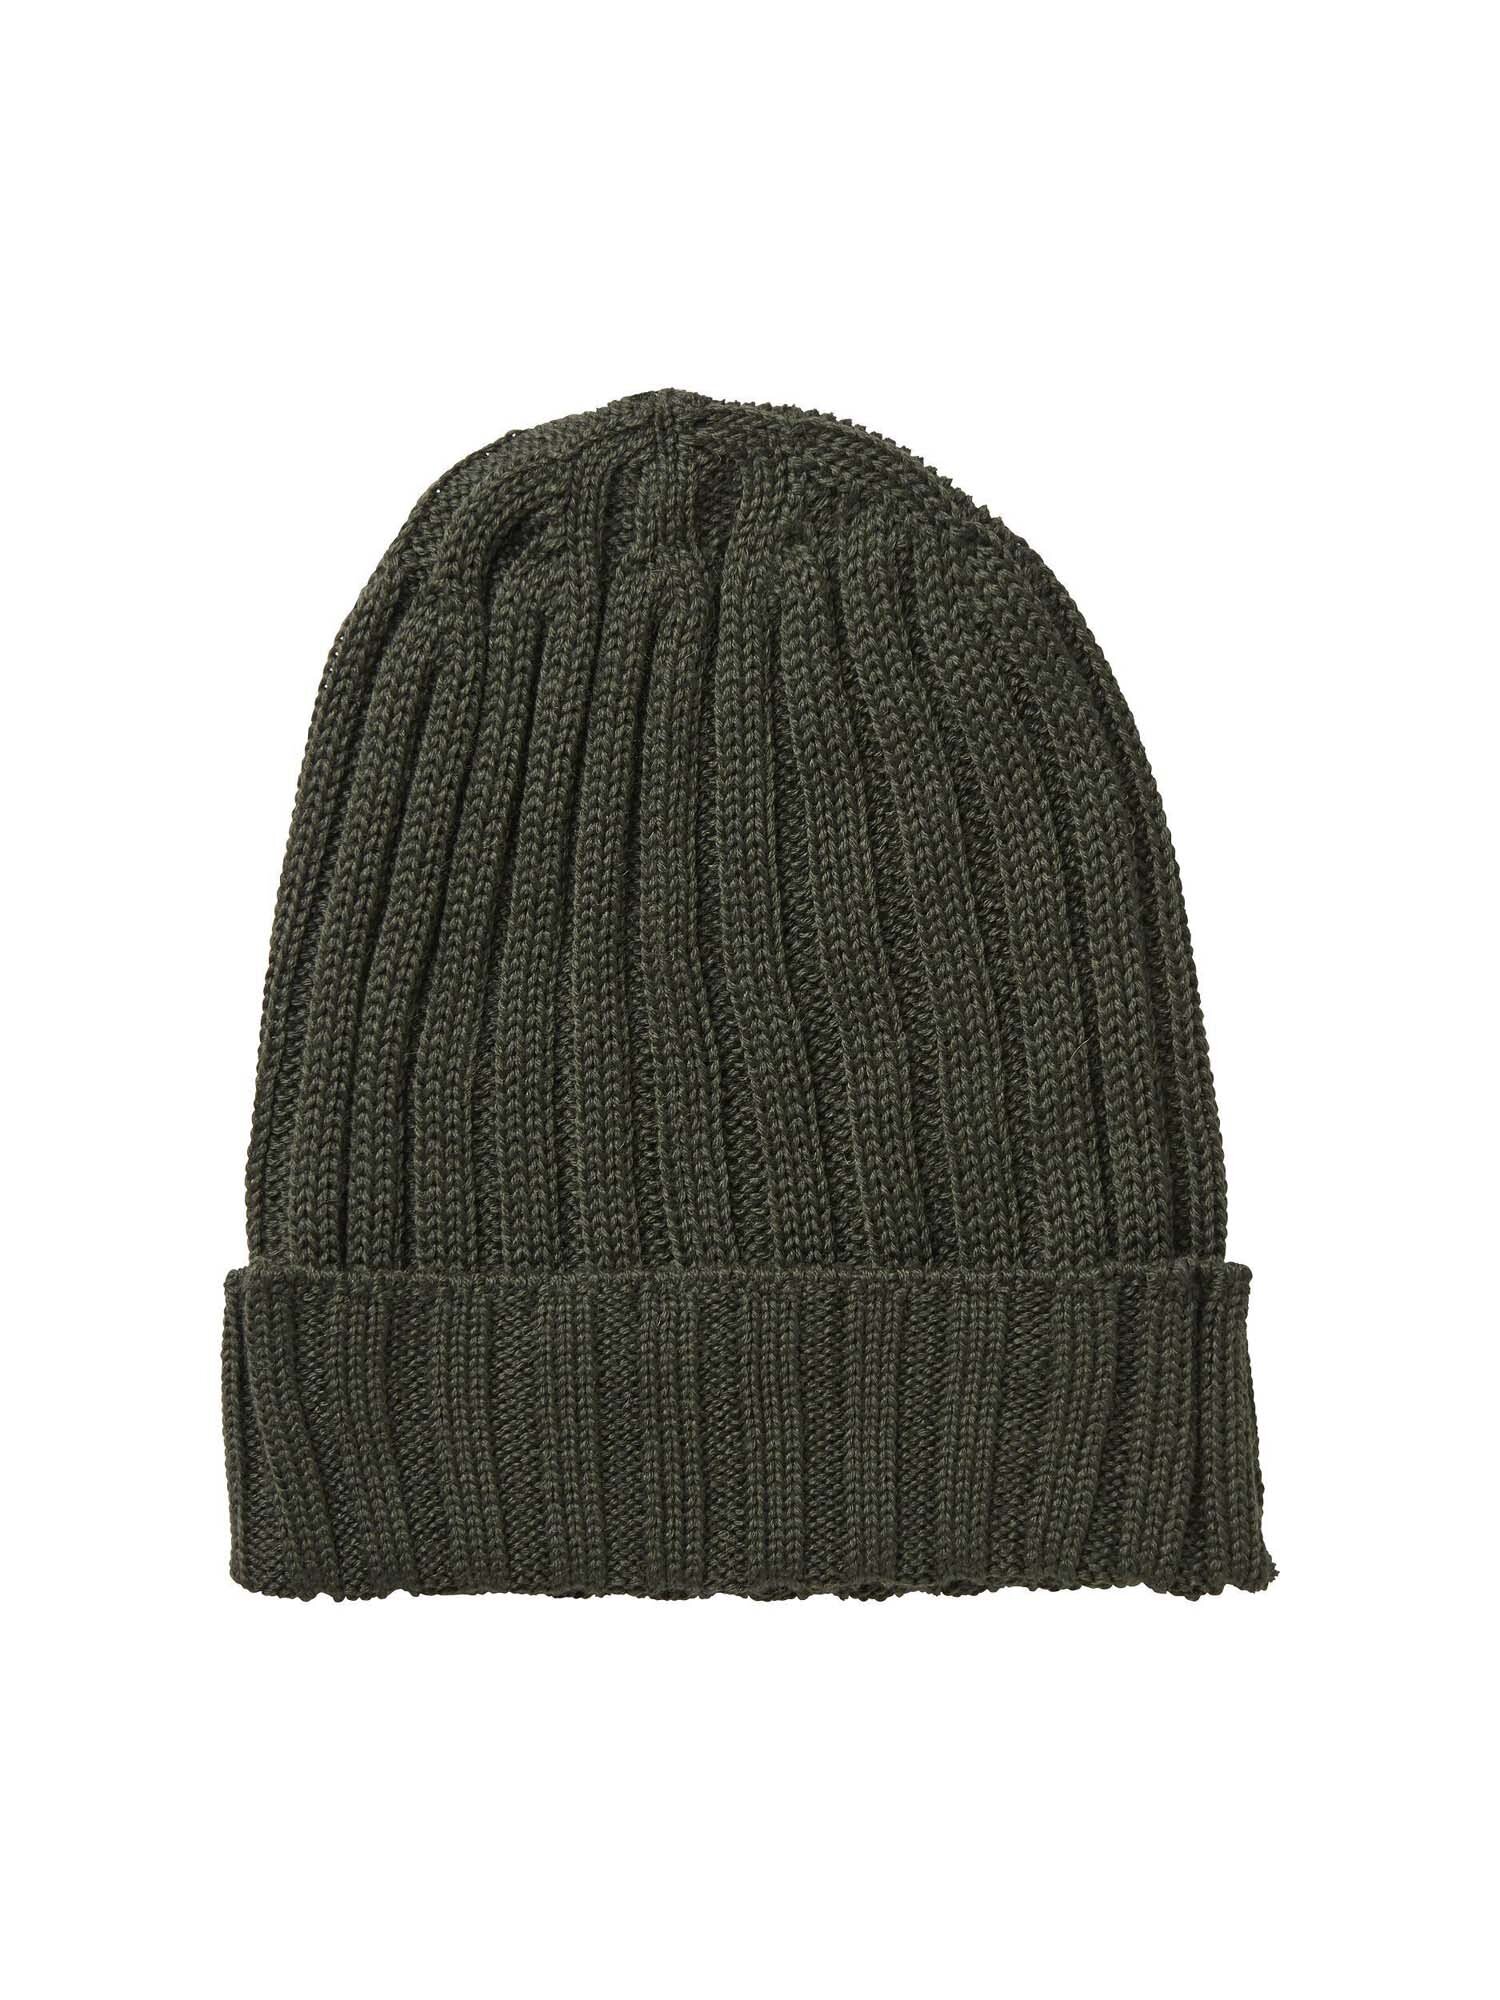 Select Point Wool Beanie